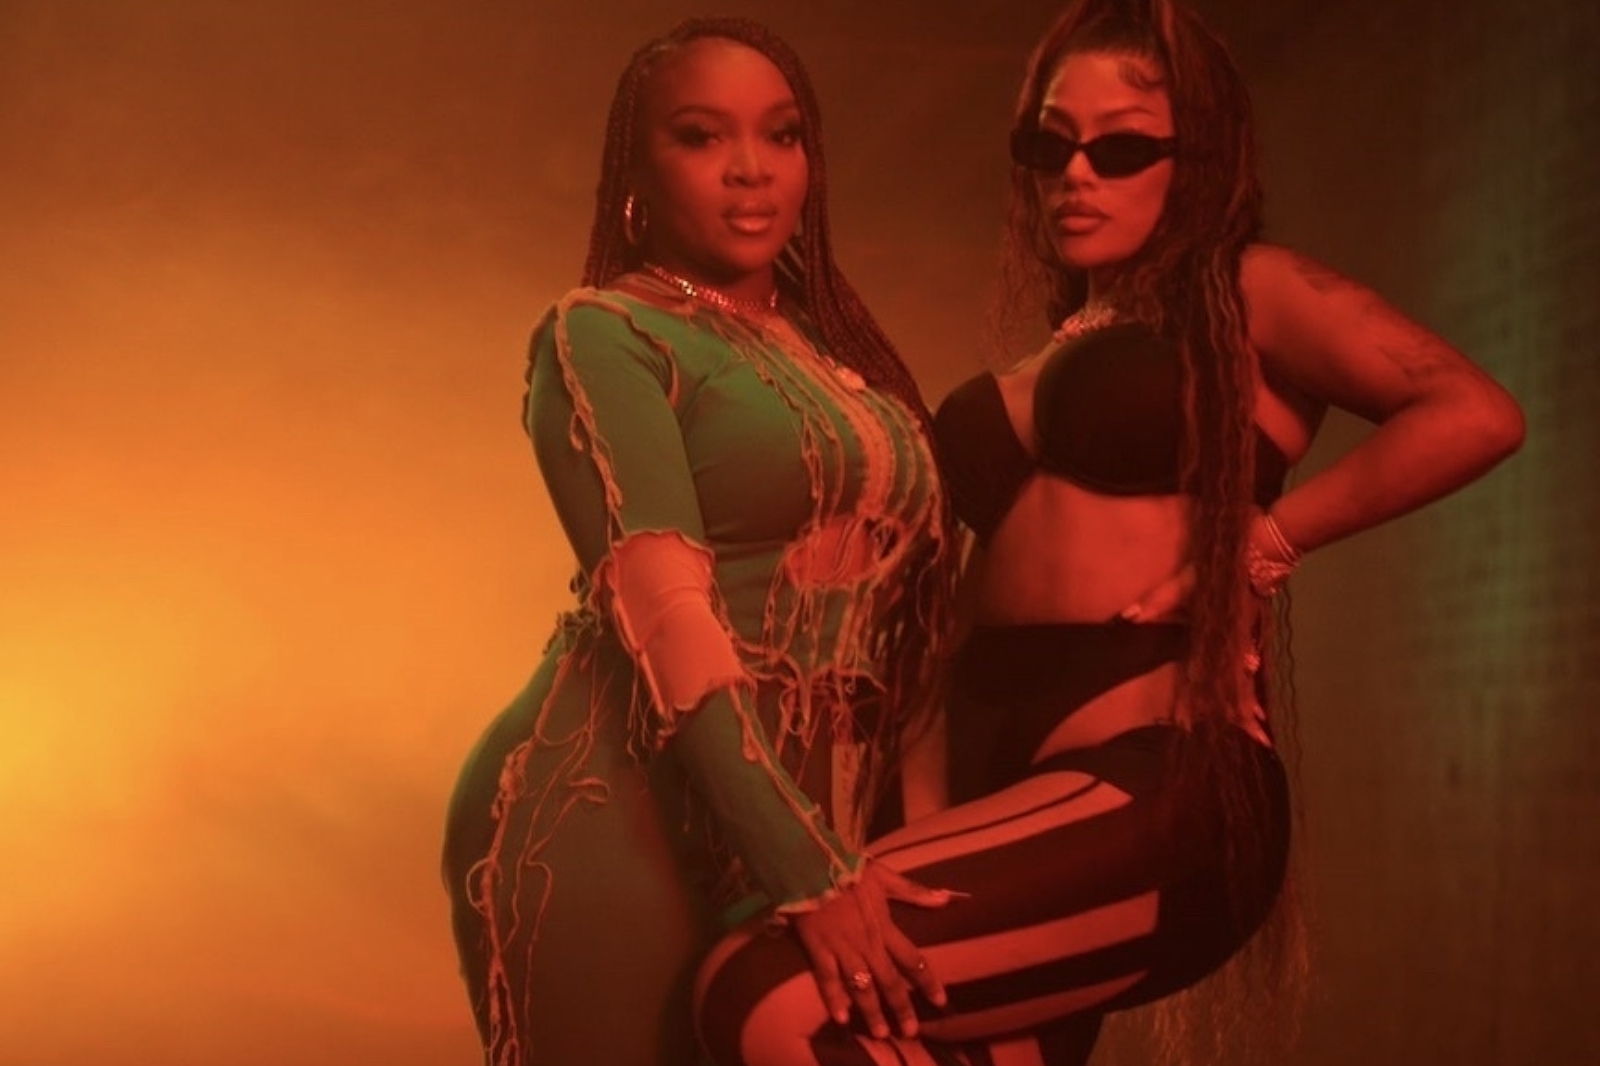 Ray BLK and Stefflon Don share 'Over You' video